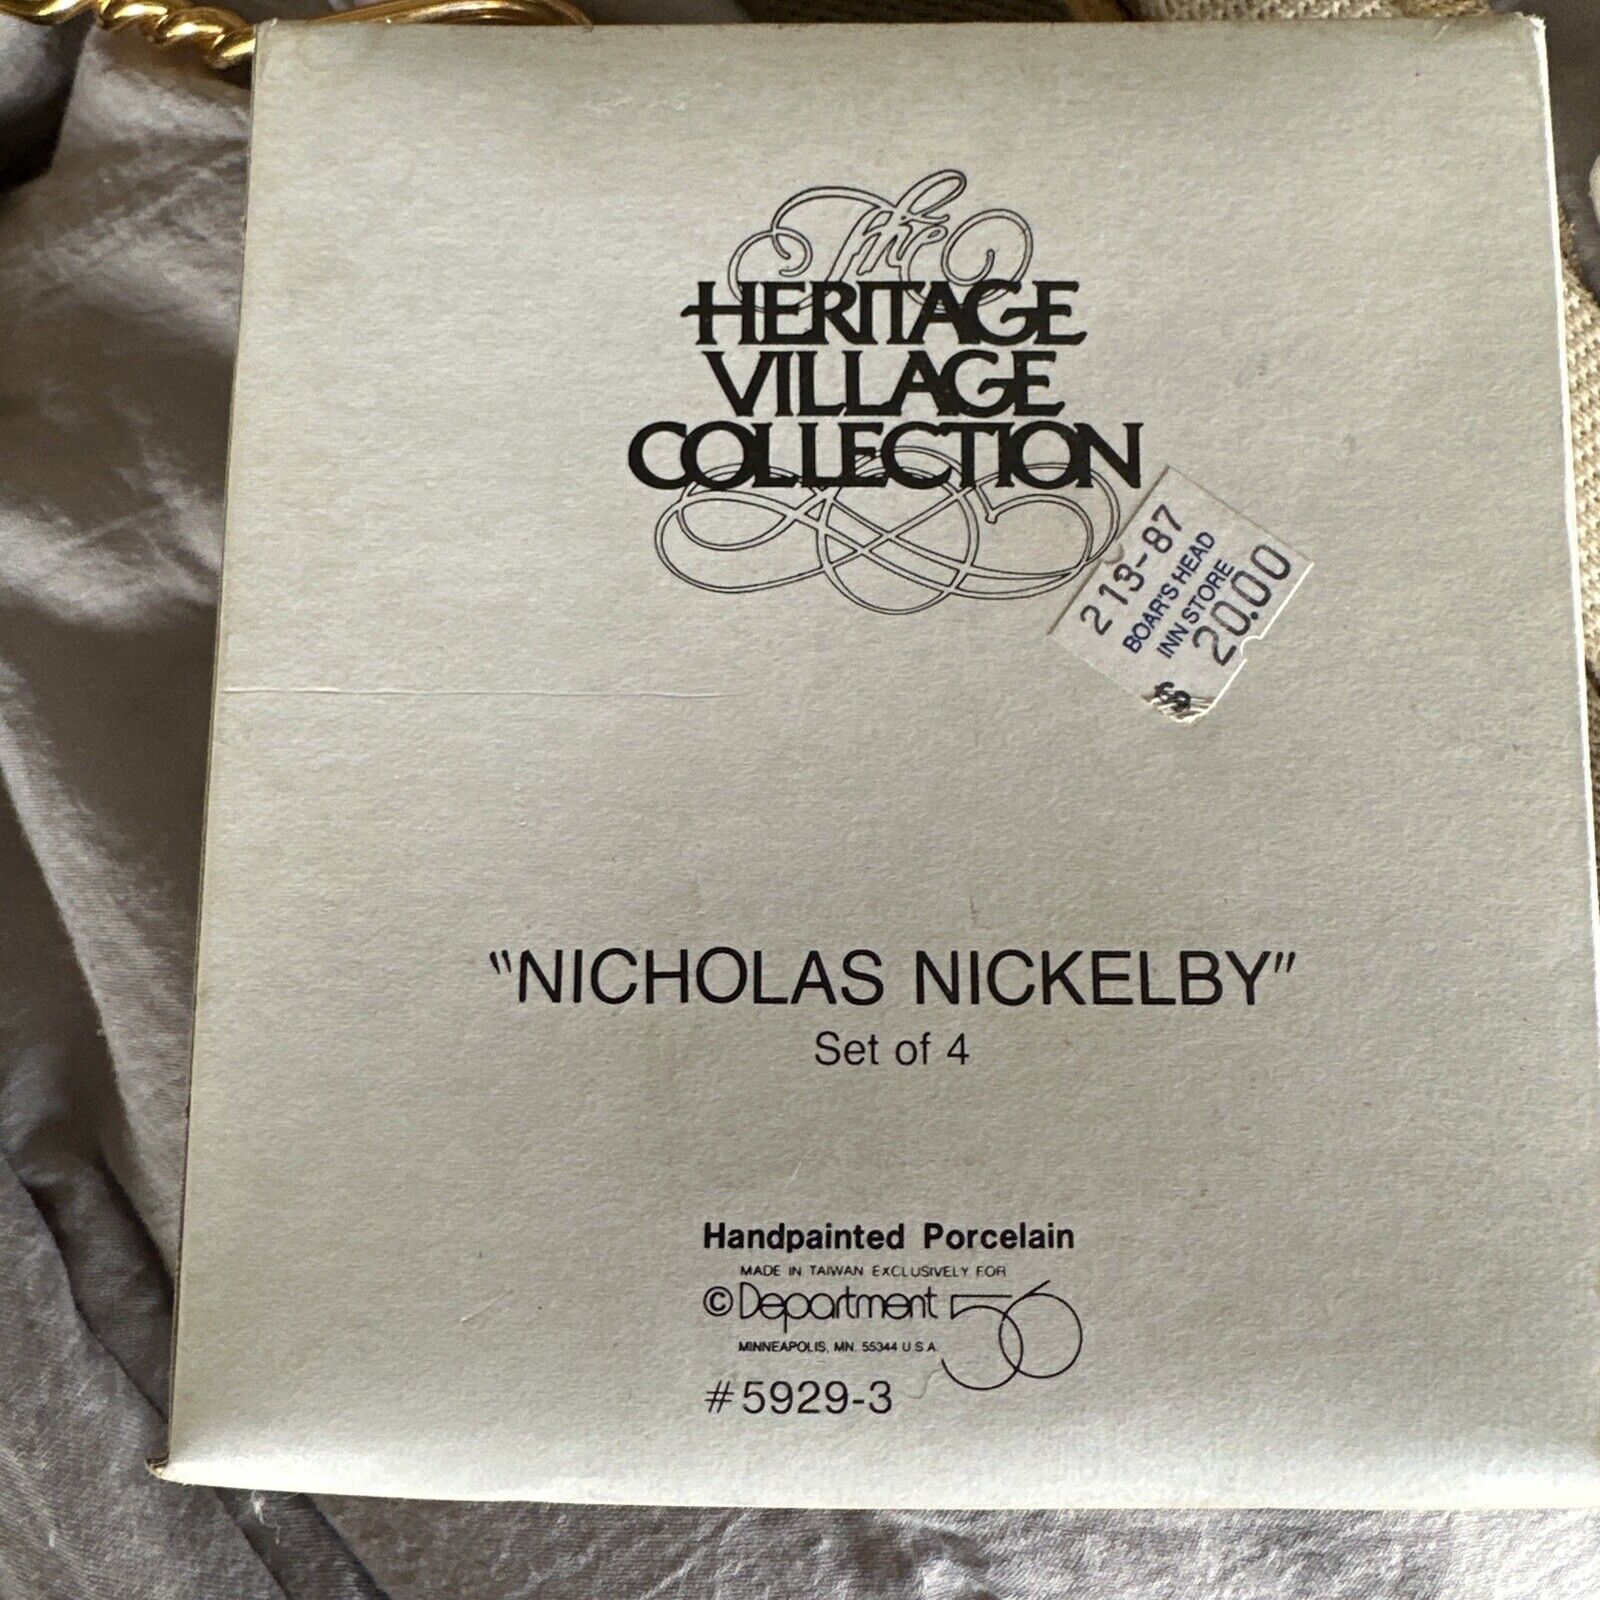 Christmas Dept 56 Heritage Village Collection Figures Nicholas Nickelby #5929-3